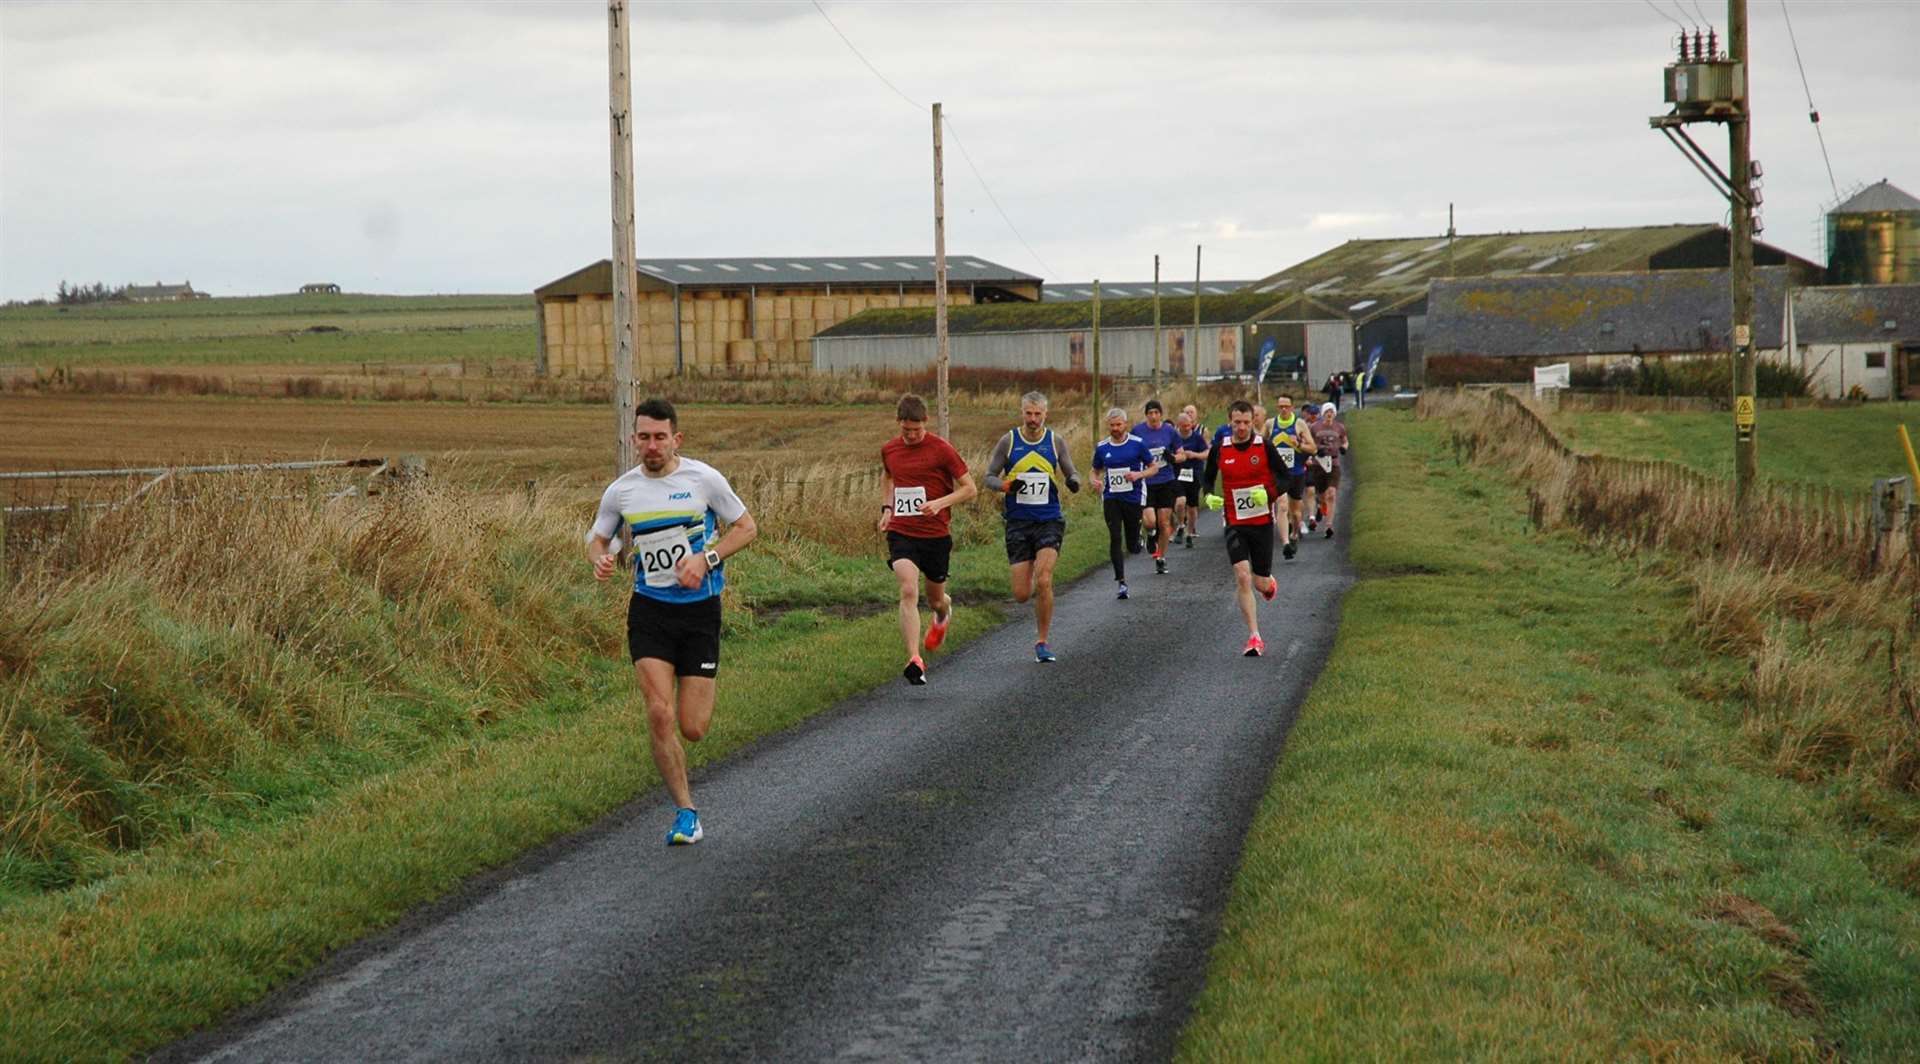 The first wave of runners in the Caithness 10k, led by Andrew Douglas.